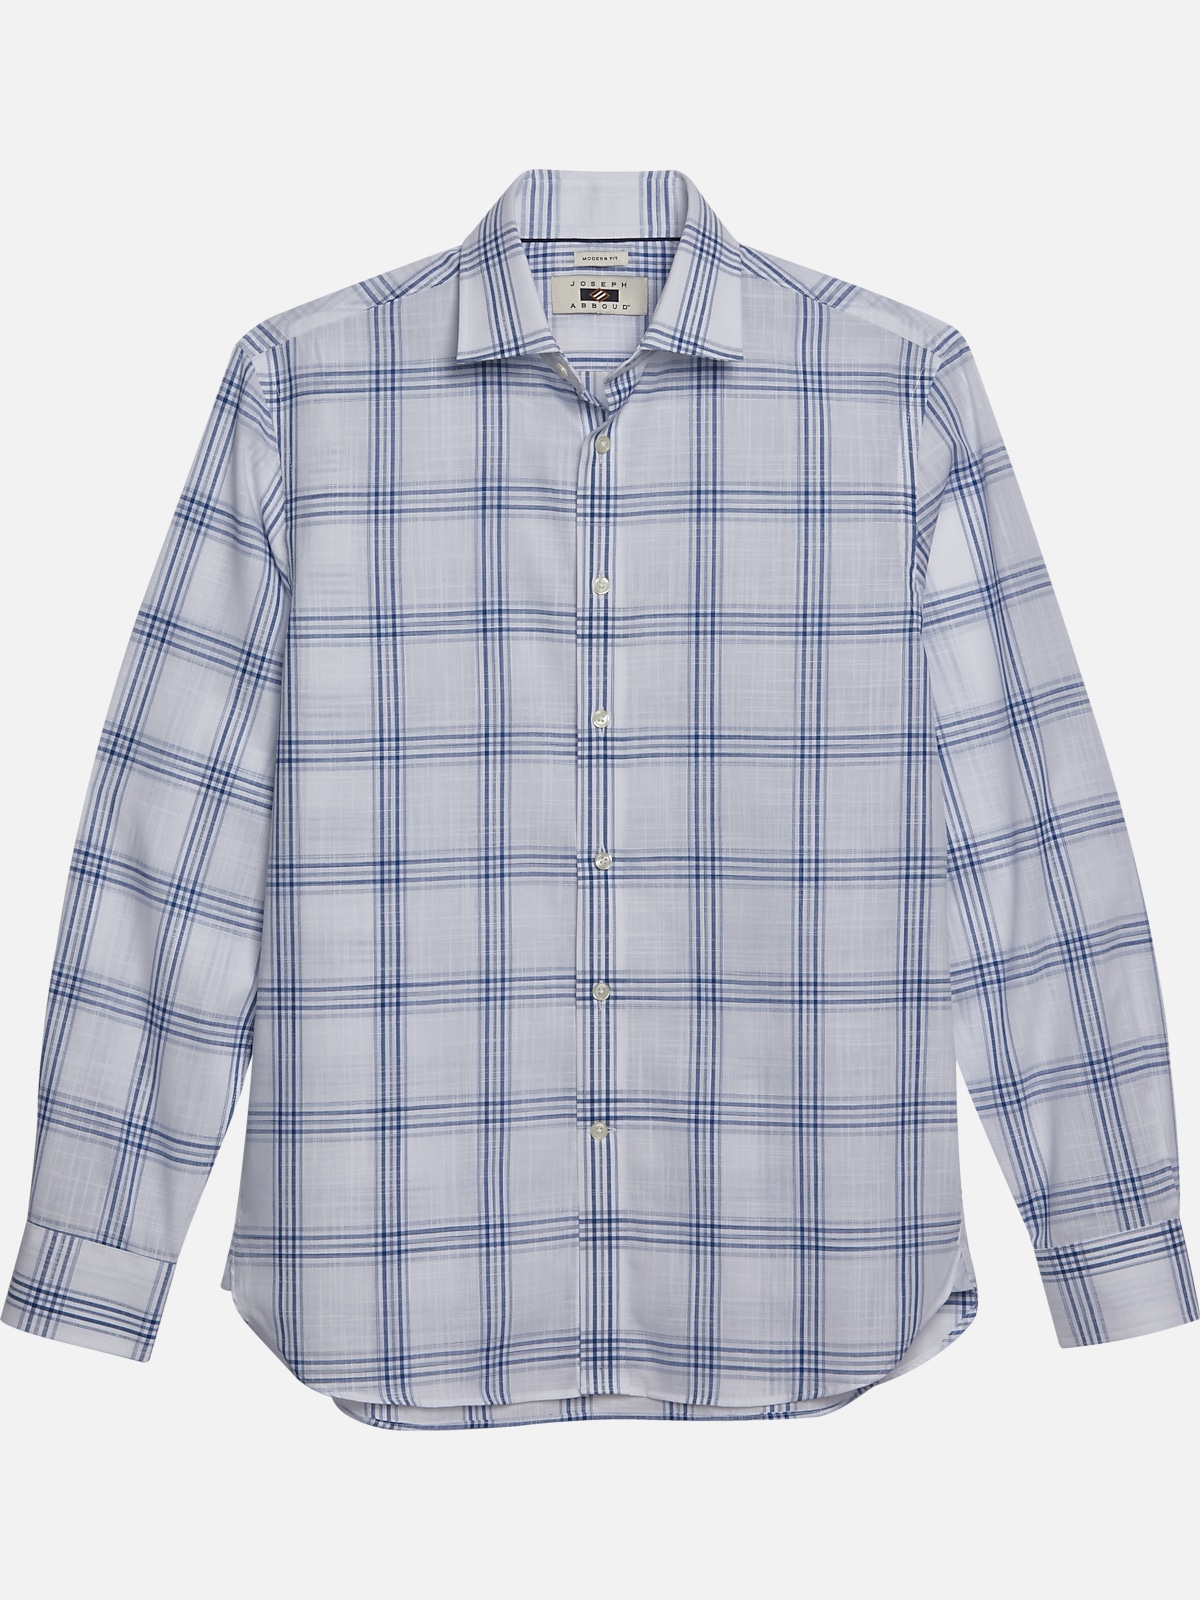 Joseph Abboud Modern Fit Large Check Sport Shirt | All Clearance $39.99 ...